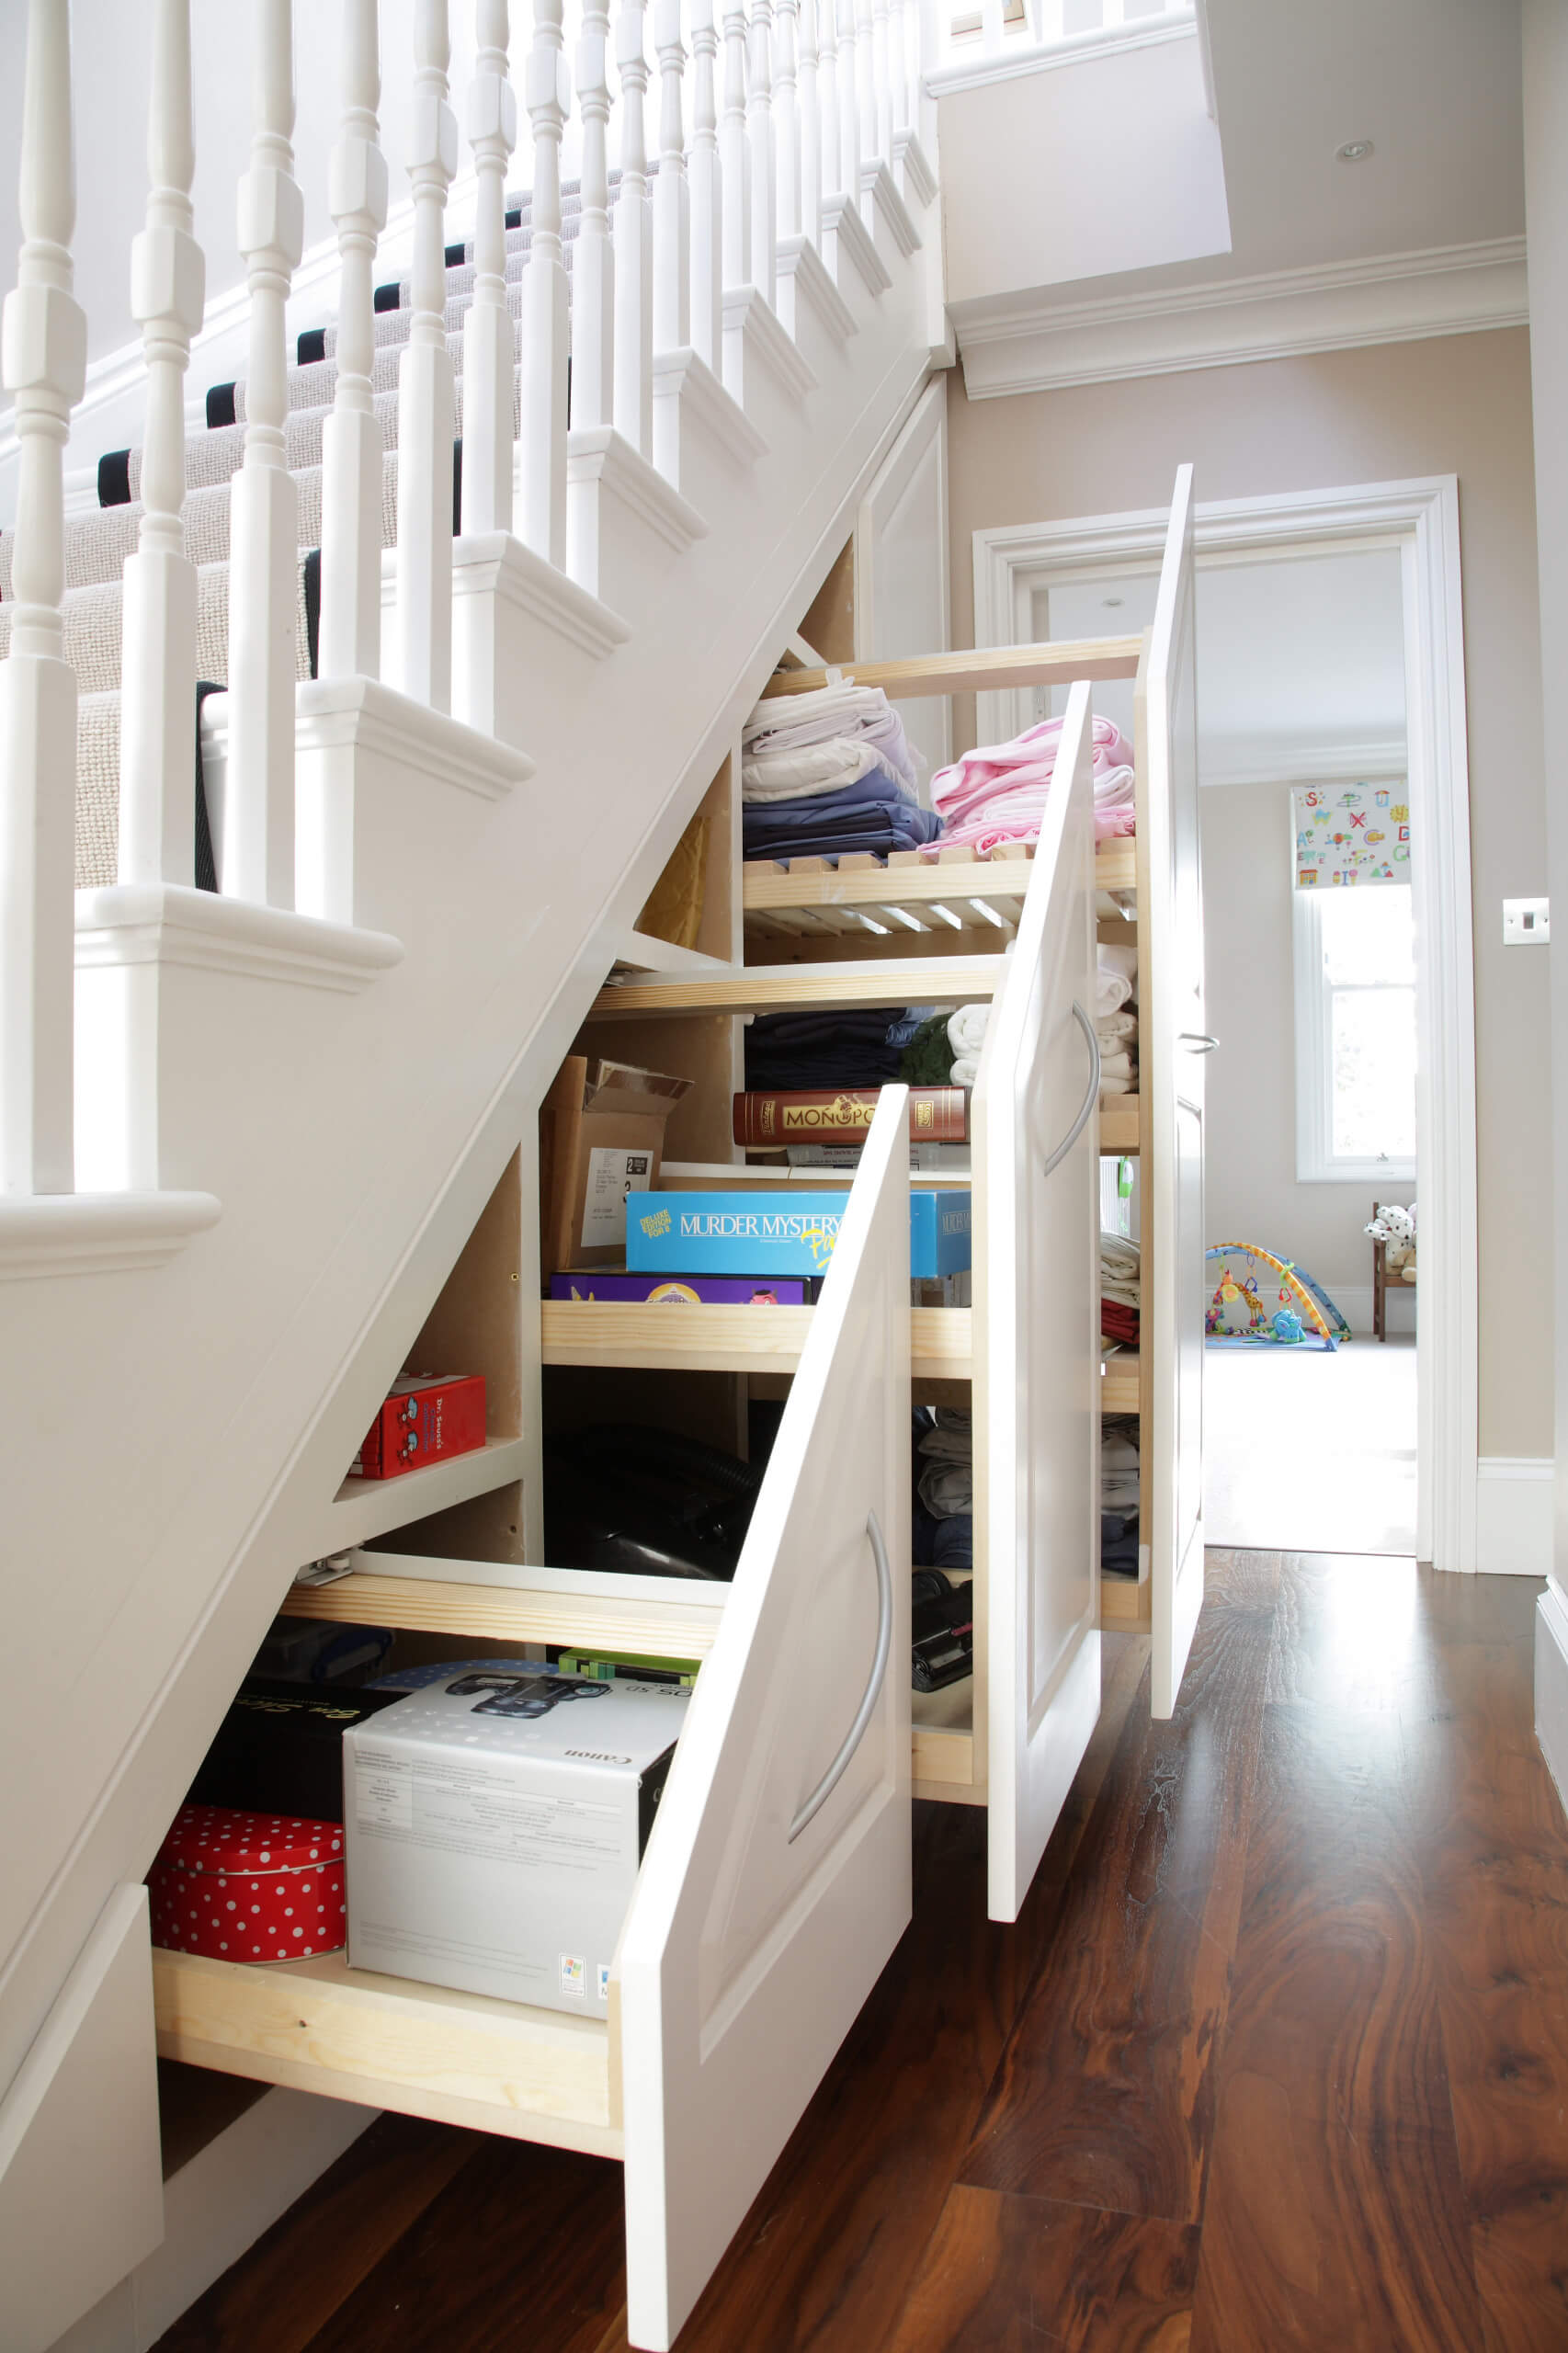 20 ideas under the stairs you will love - 129